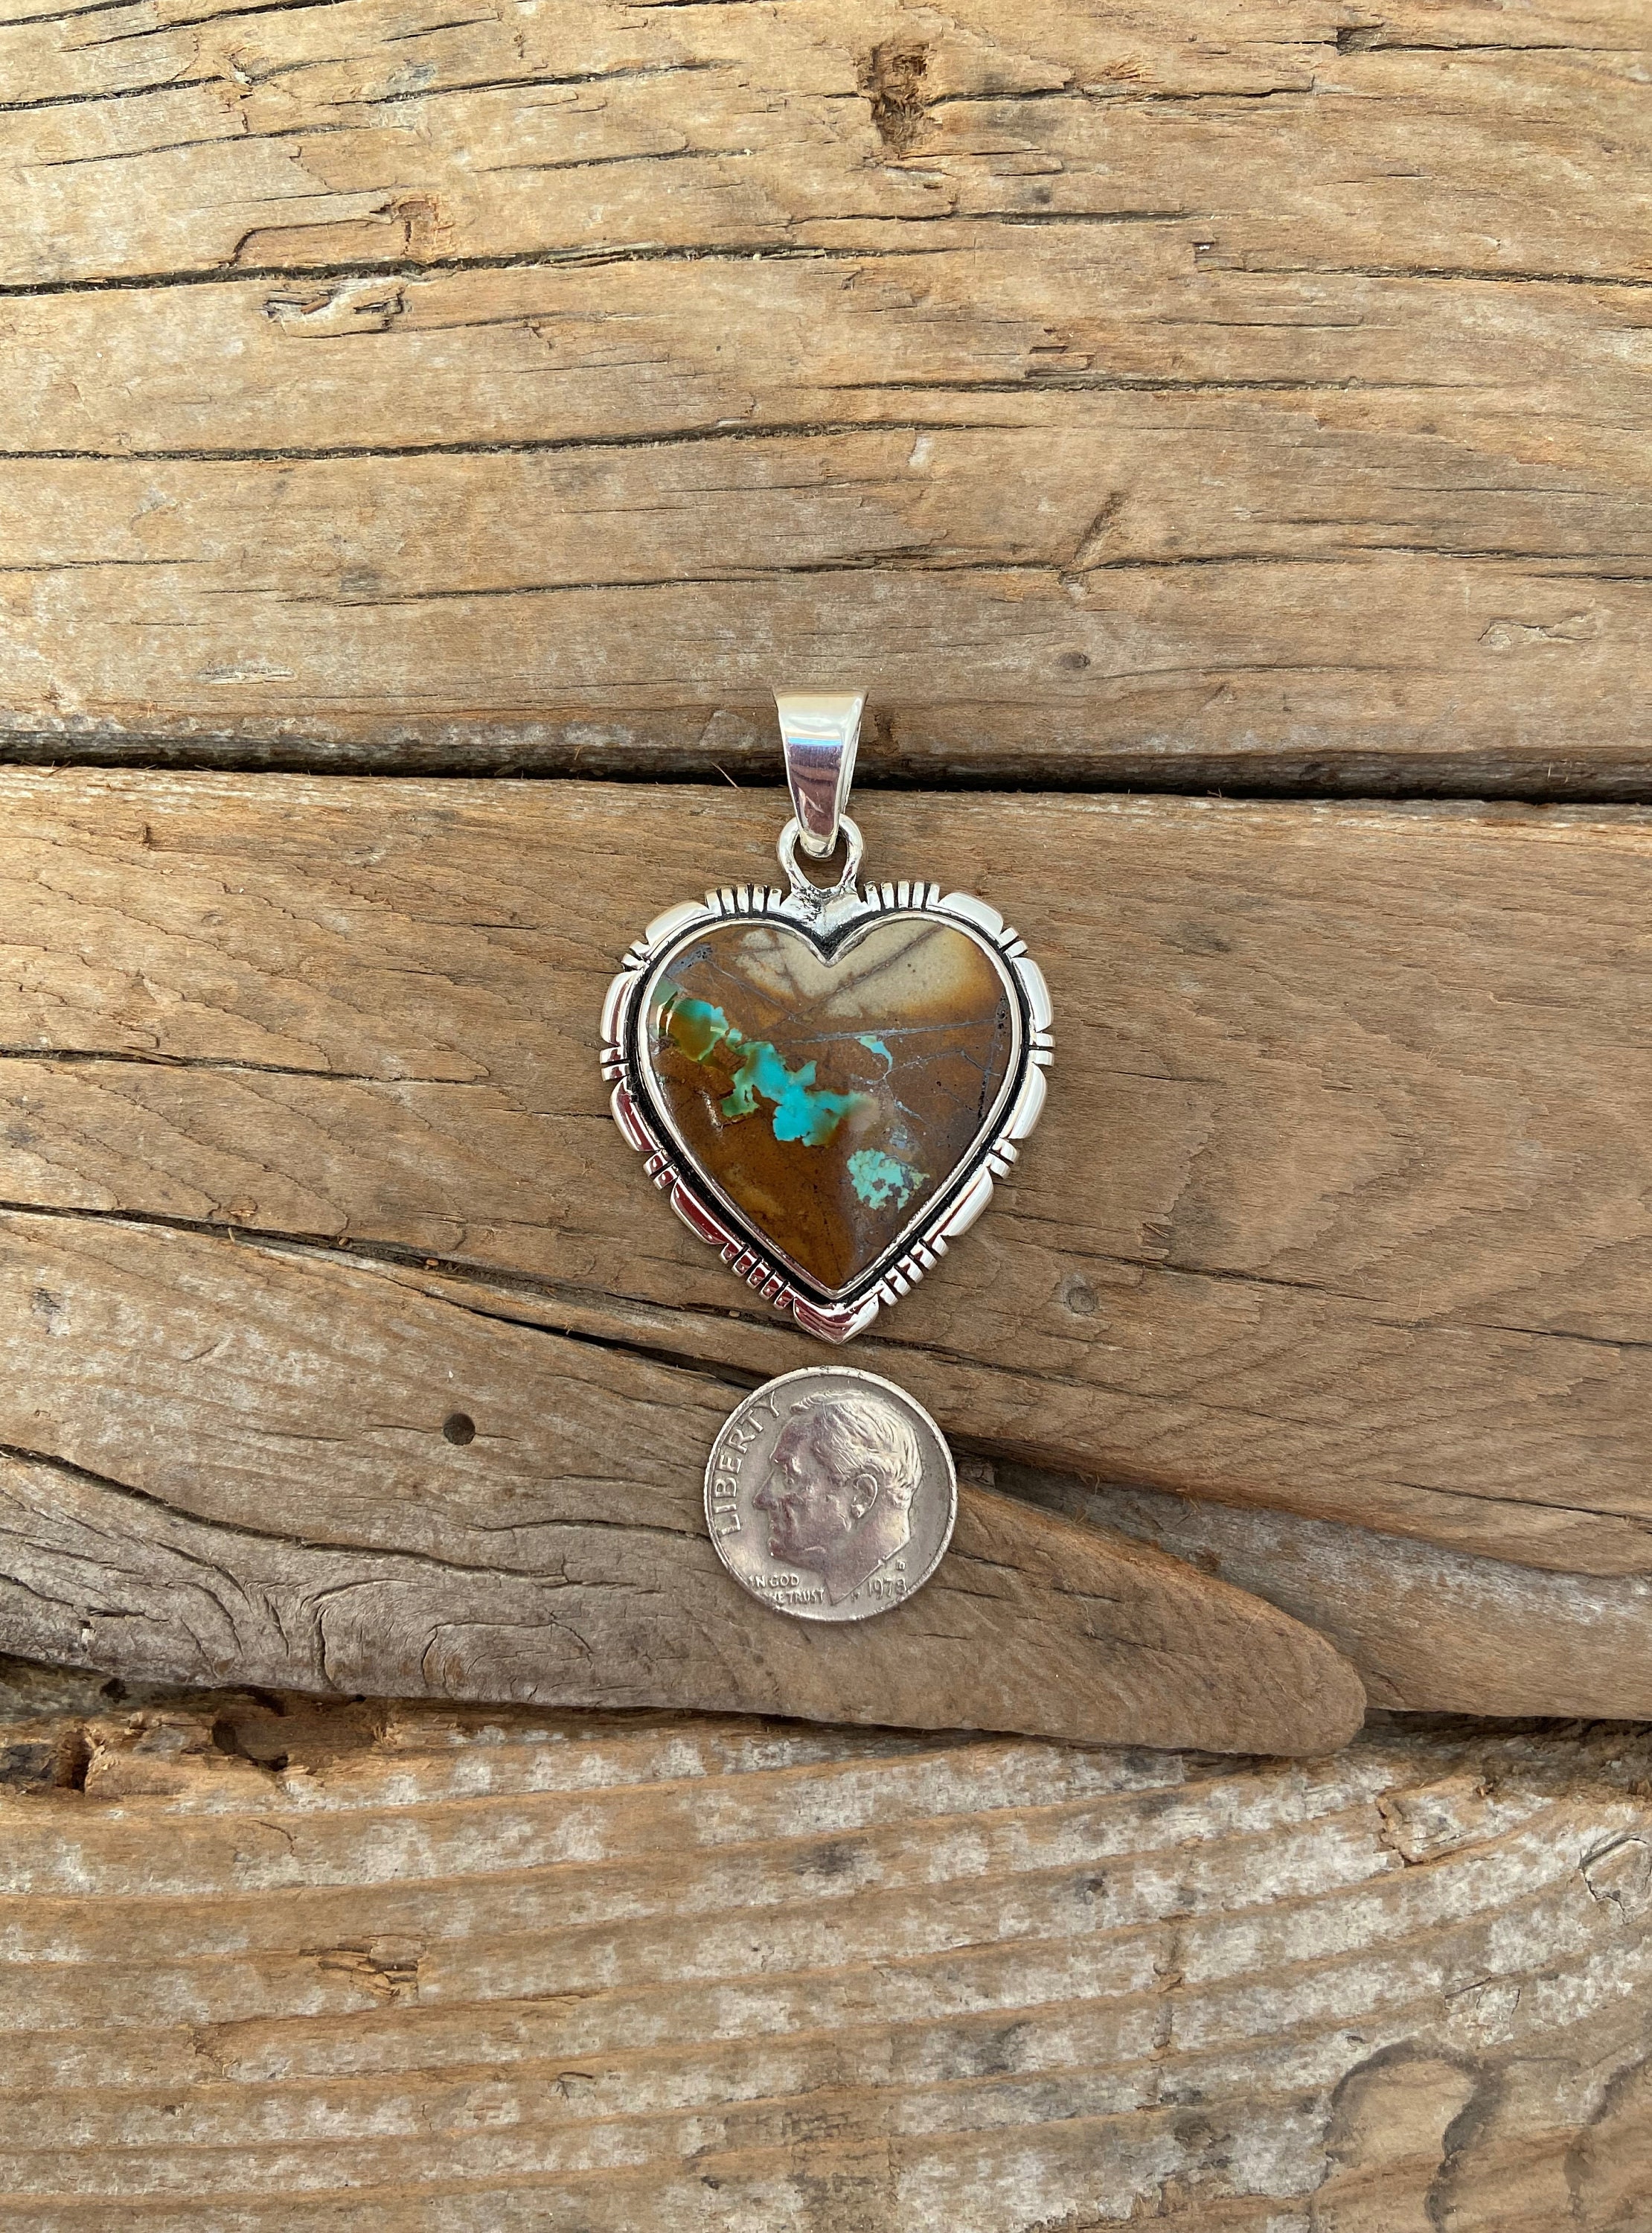 TURQUOISE HEART PENDANT APROX 1 INCH TALL ATTRACTIVE 1 RANDOM HEART 